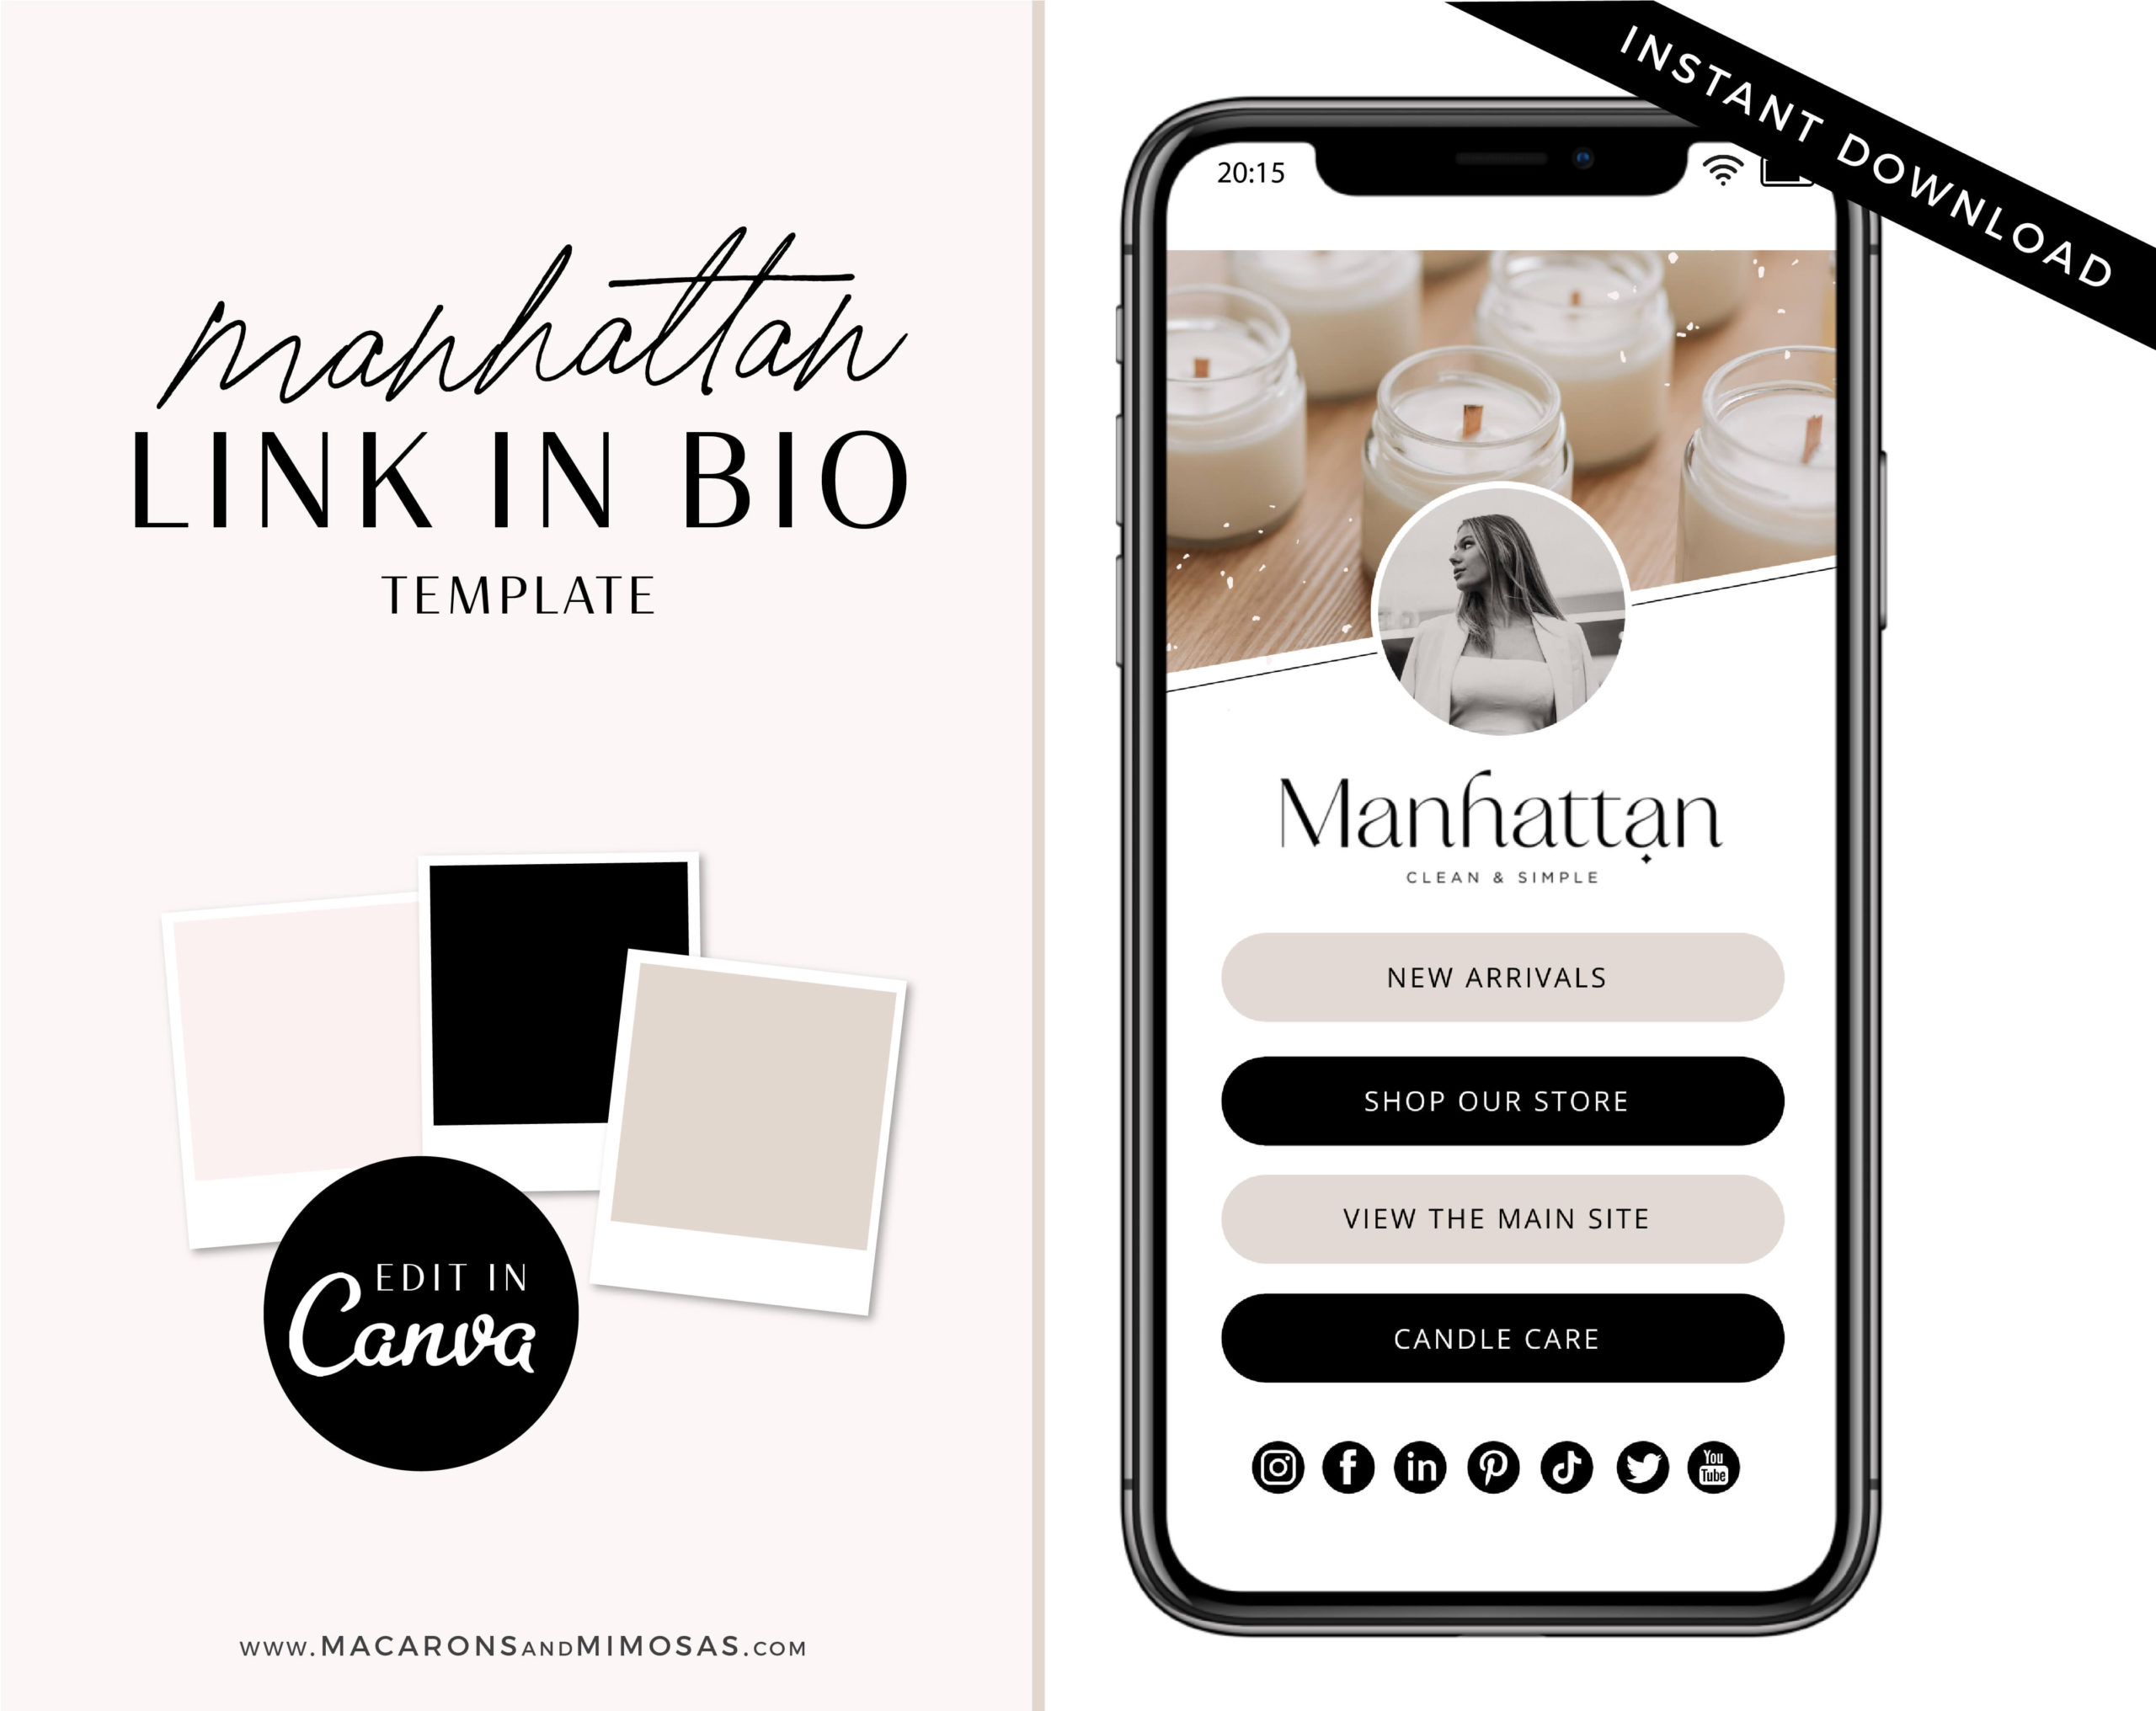 Modern candle company link in bio page template editable in canva with clickable links, digital business card Linktr.ee design